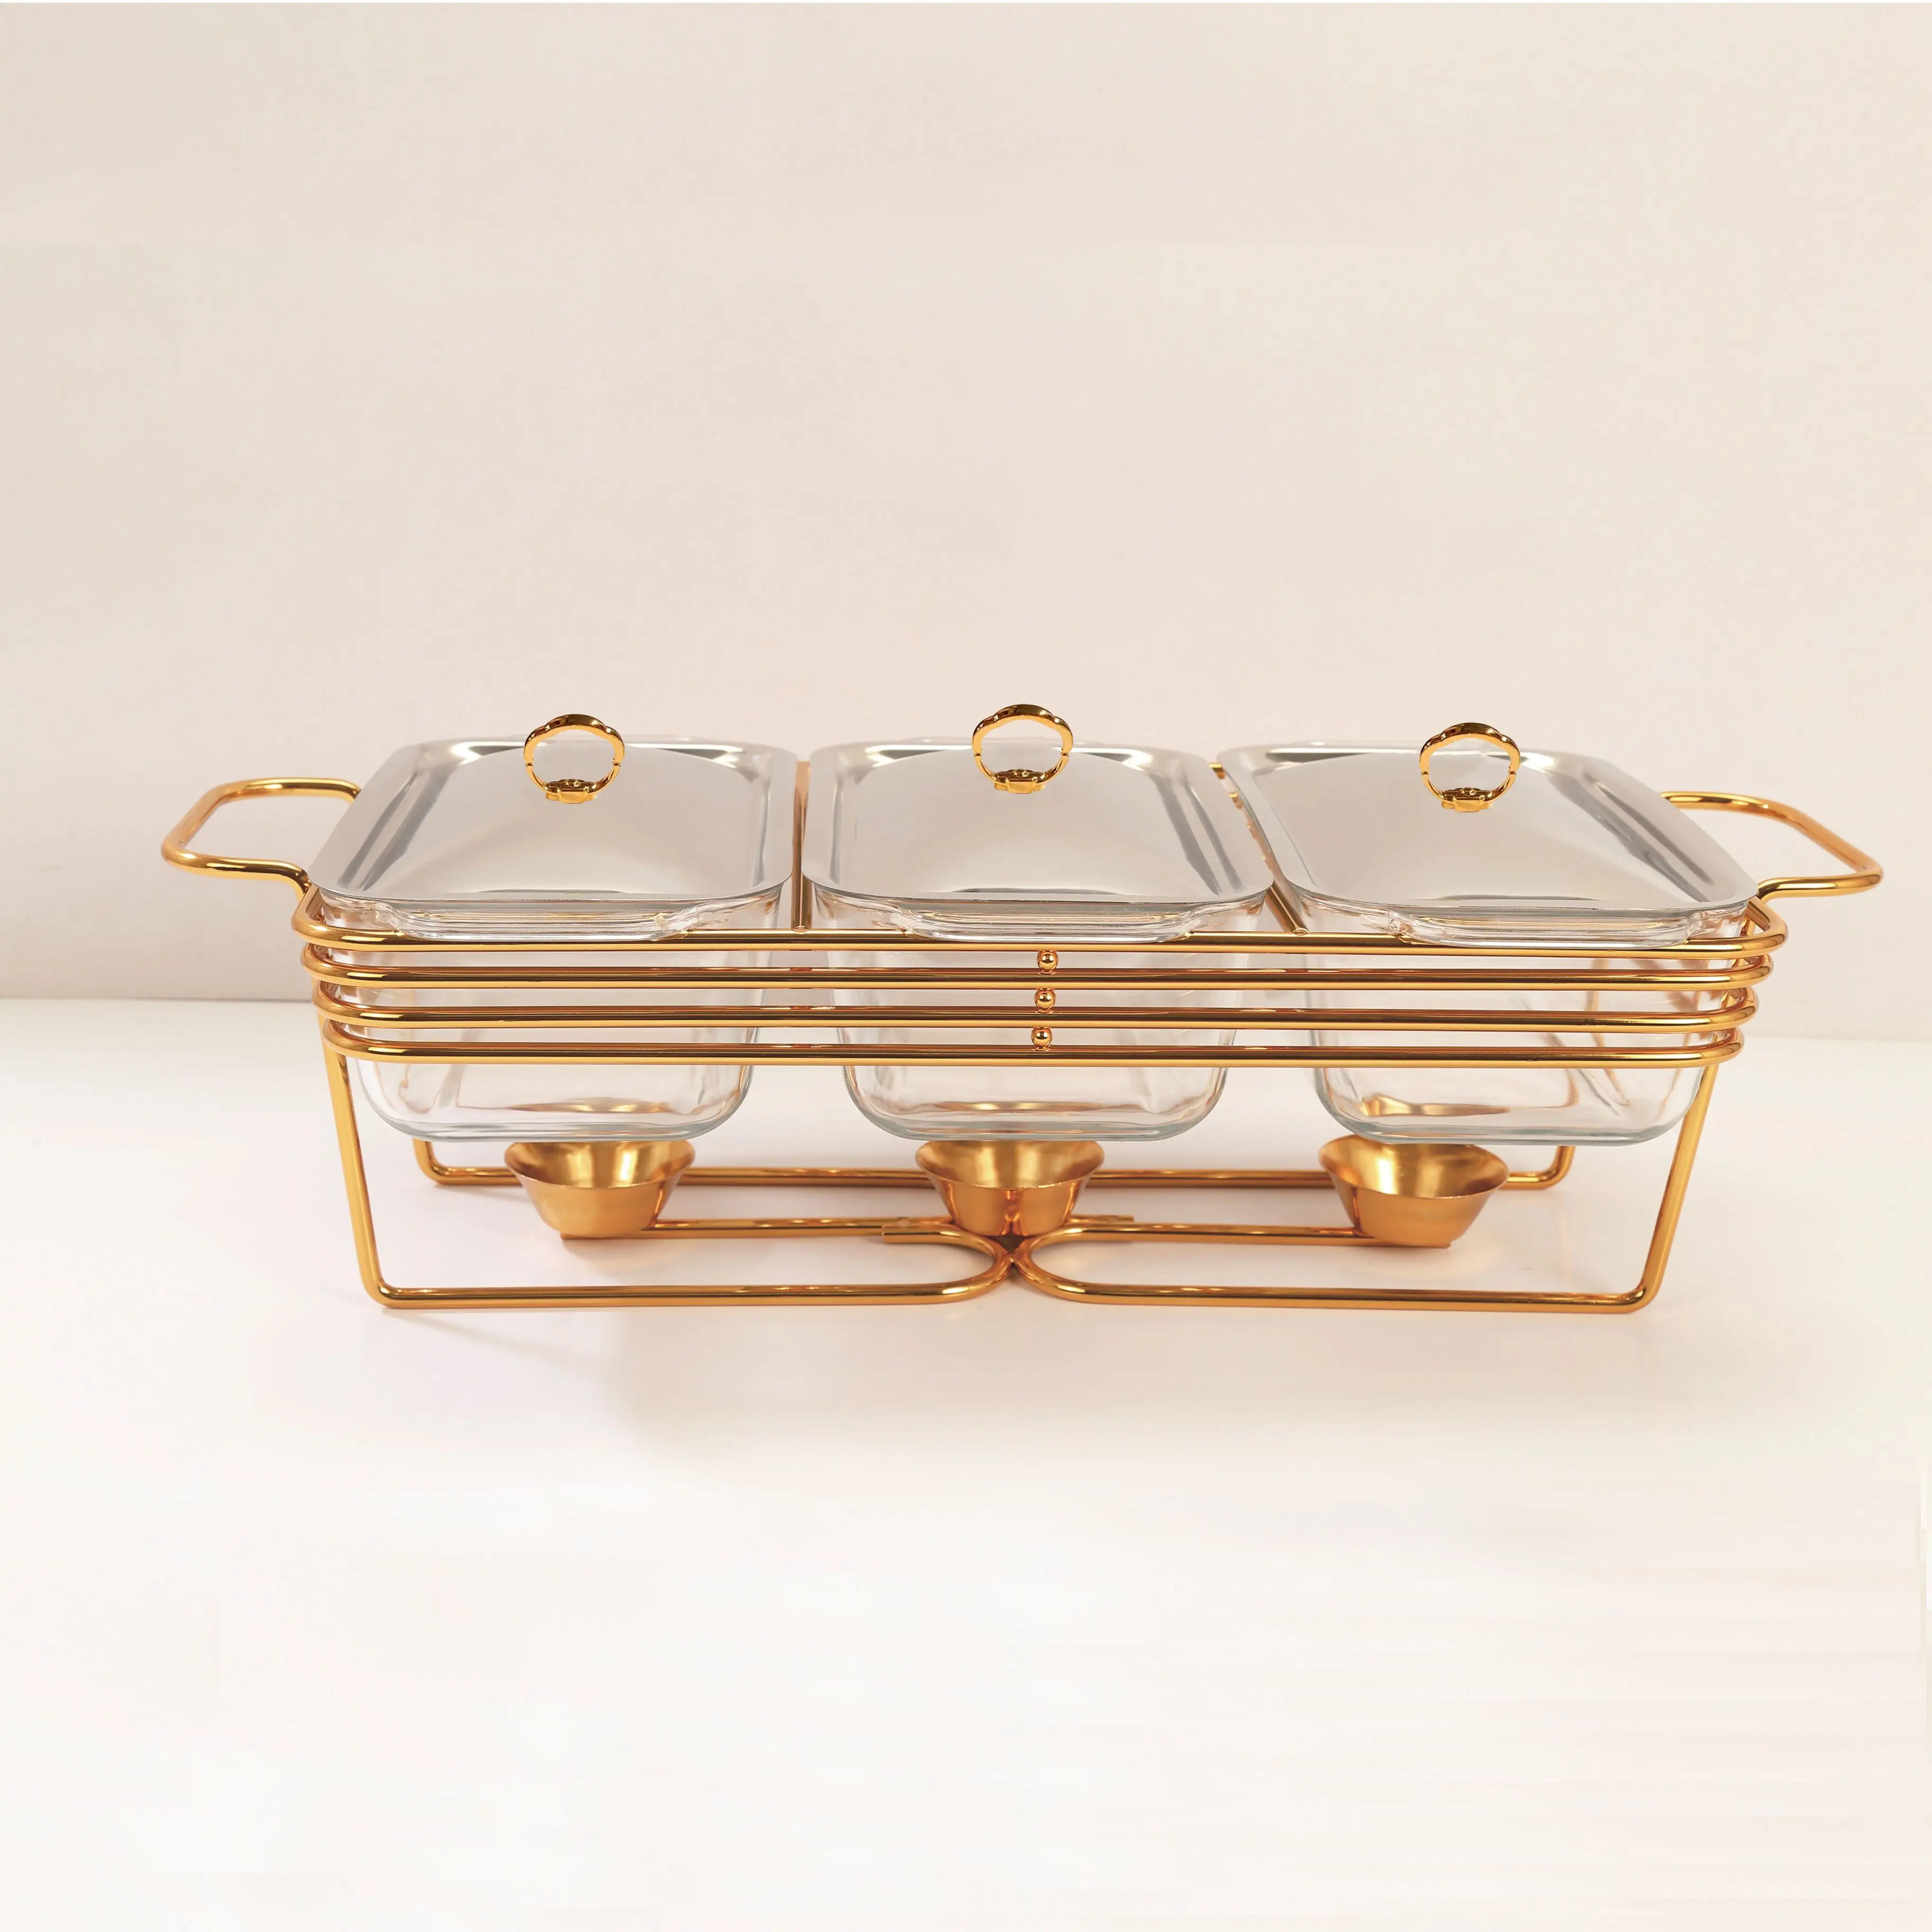 Kitchen Utensil Ceramic Cover Dish Buffet Chafing Dish For Restaurant With European standards